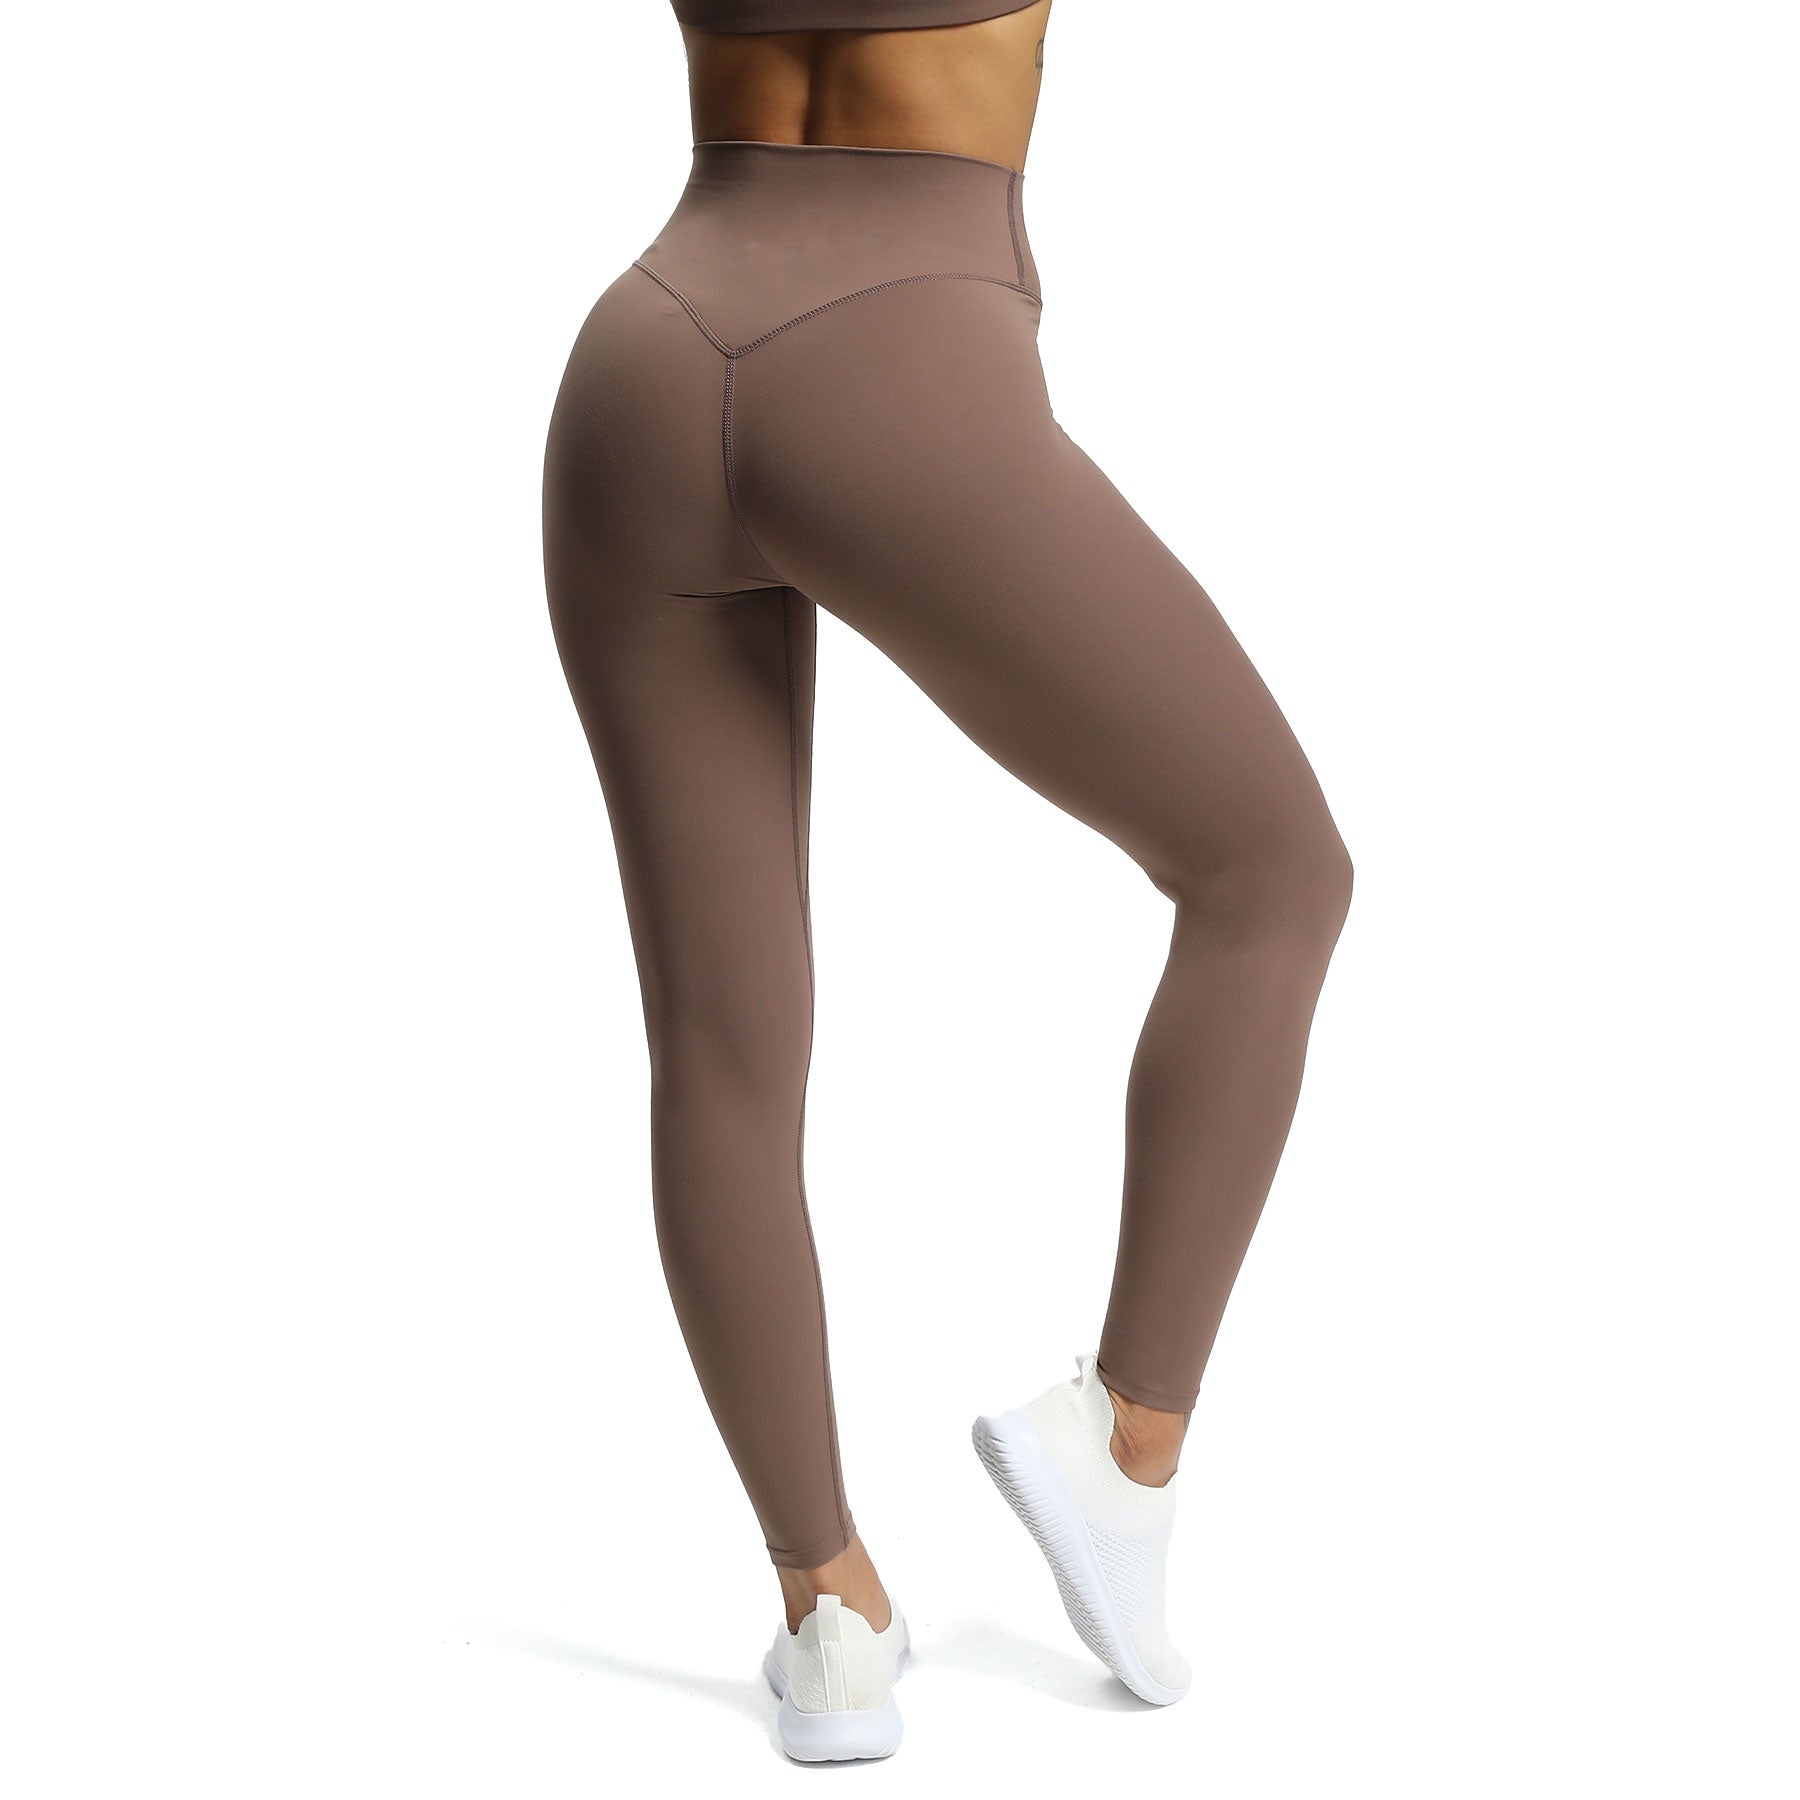 Track Terry Lounge Seamless Legging - Oxide - 4X/5X at Skims